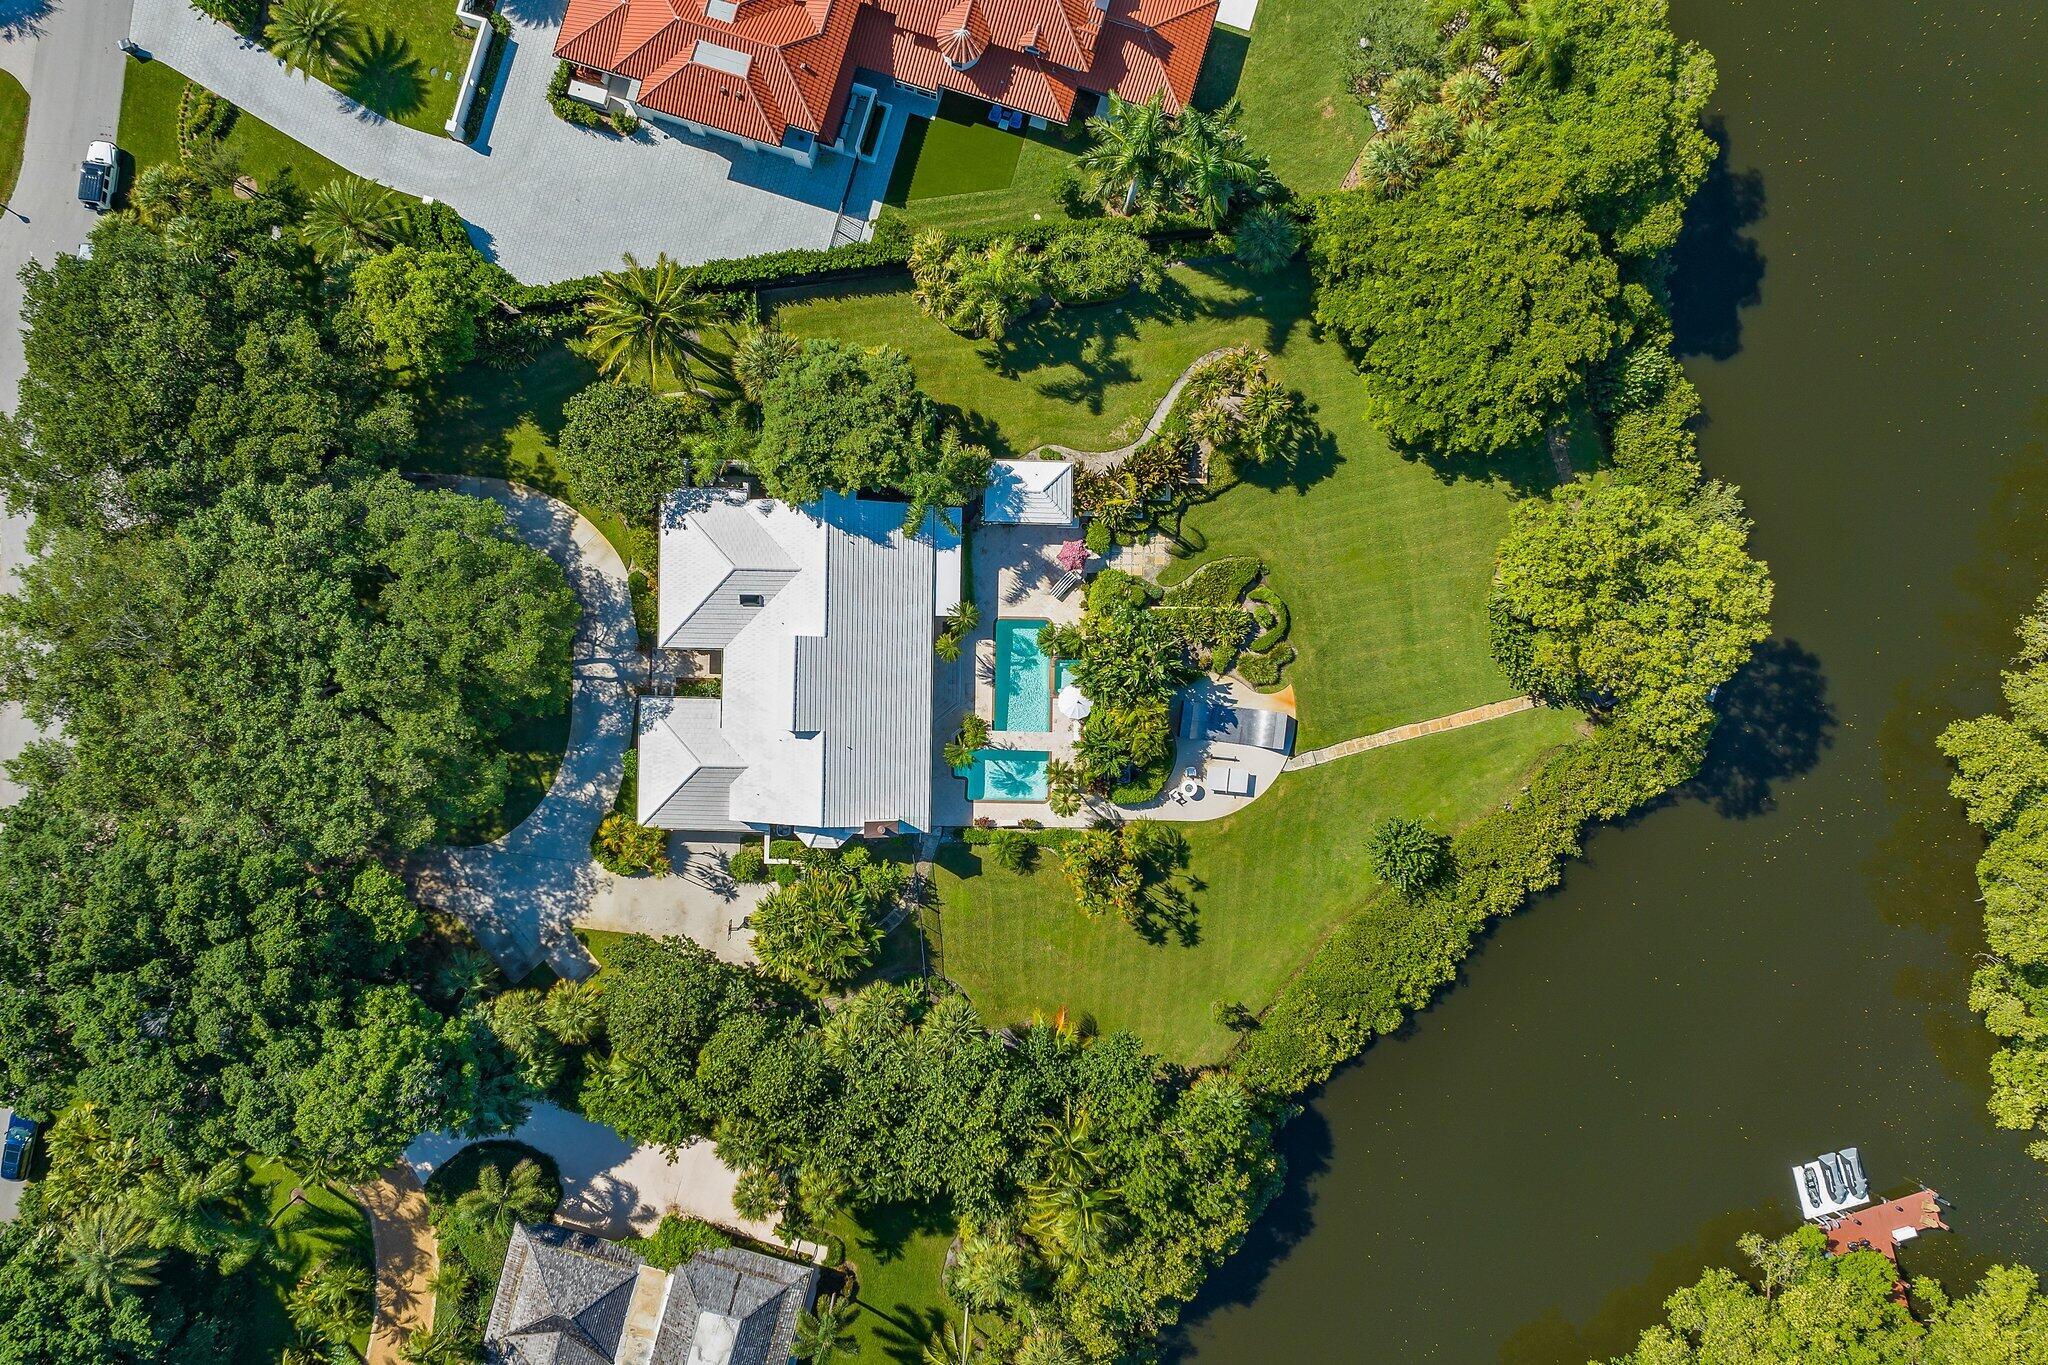 Rare 1.5 acres gem nestled in gated Seminole Landing.  Beautiful Banyan trees on water with baot access.  This 4 bedroom, 3.5 bath home features a private dock, lush tropical landscaping, pool and spa.  Intracoastal/Ocean access, 25 min to airport, 25 min to Palm Beach.